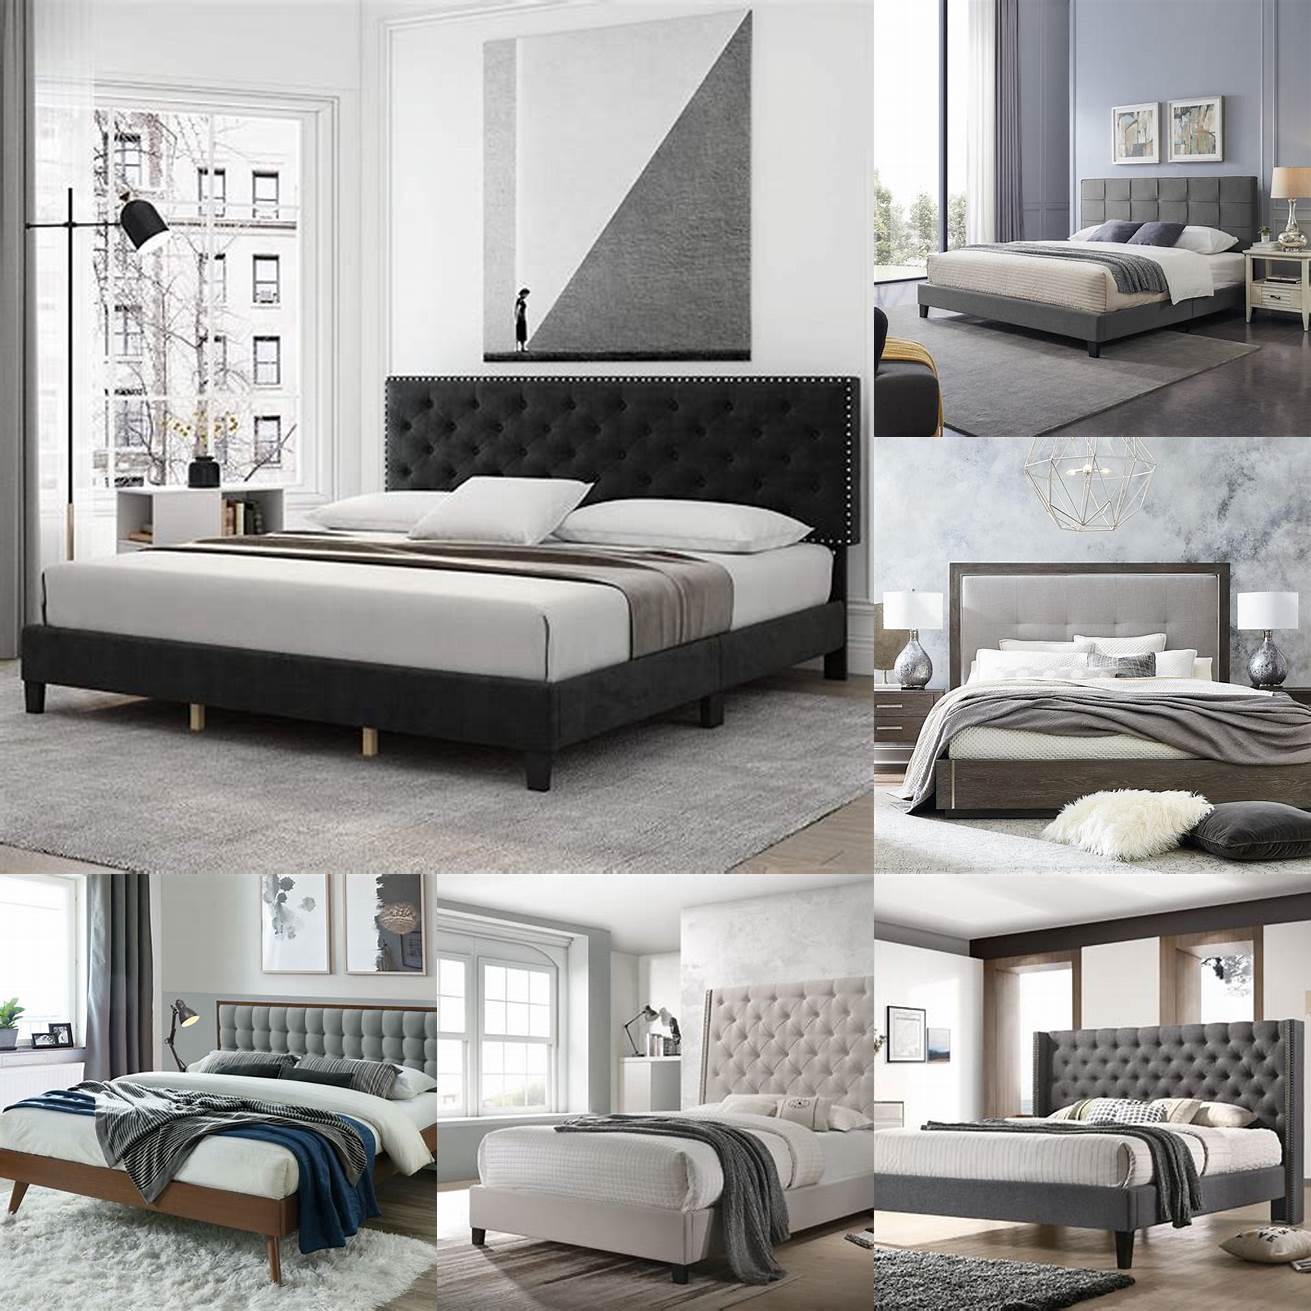 Modern king bed with upholstered headboard